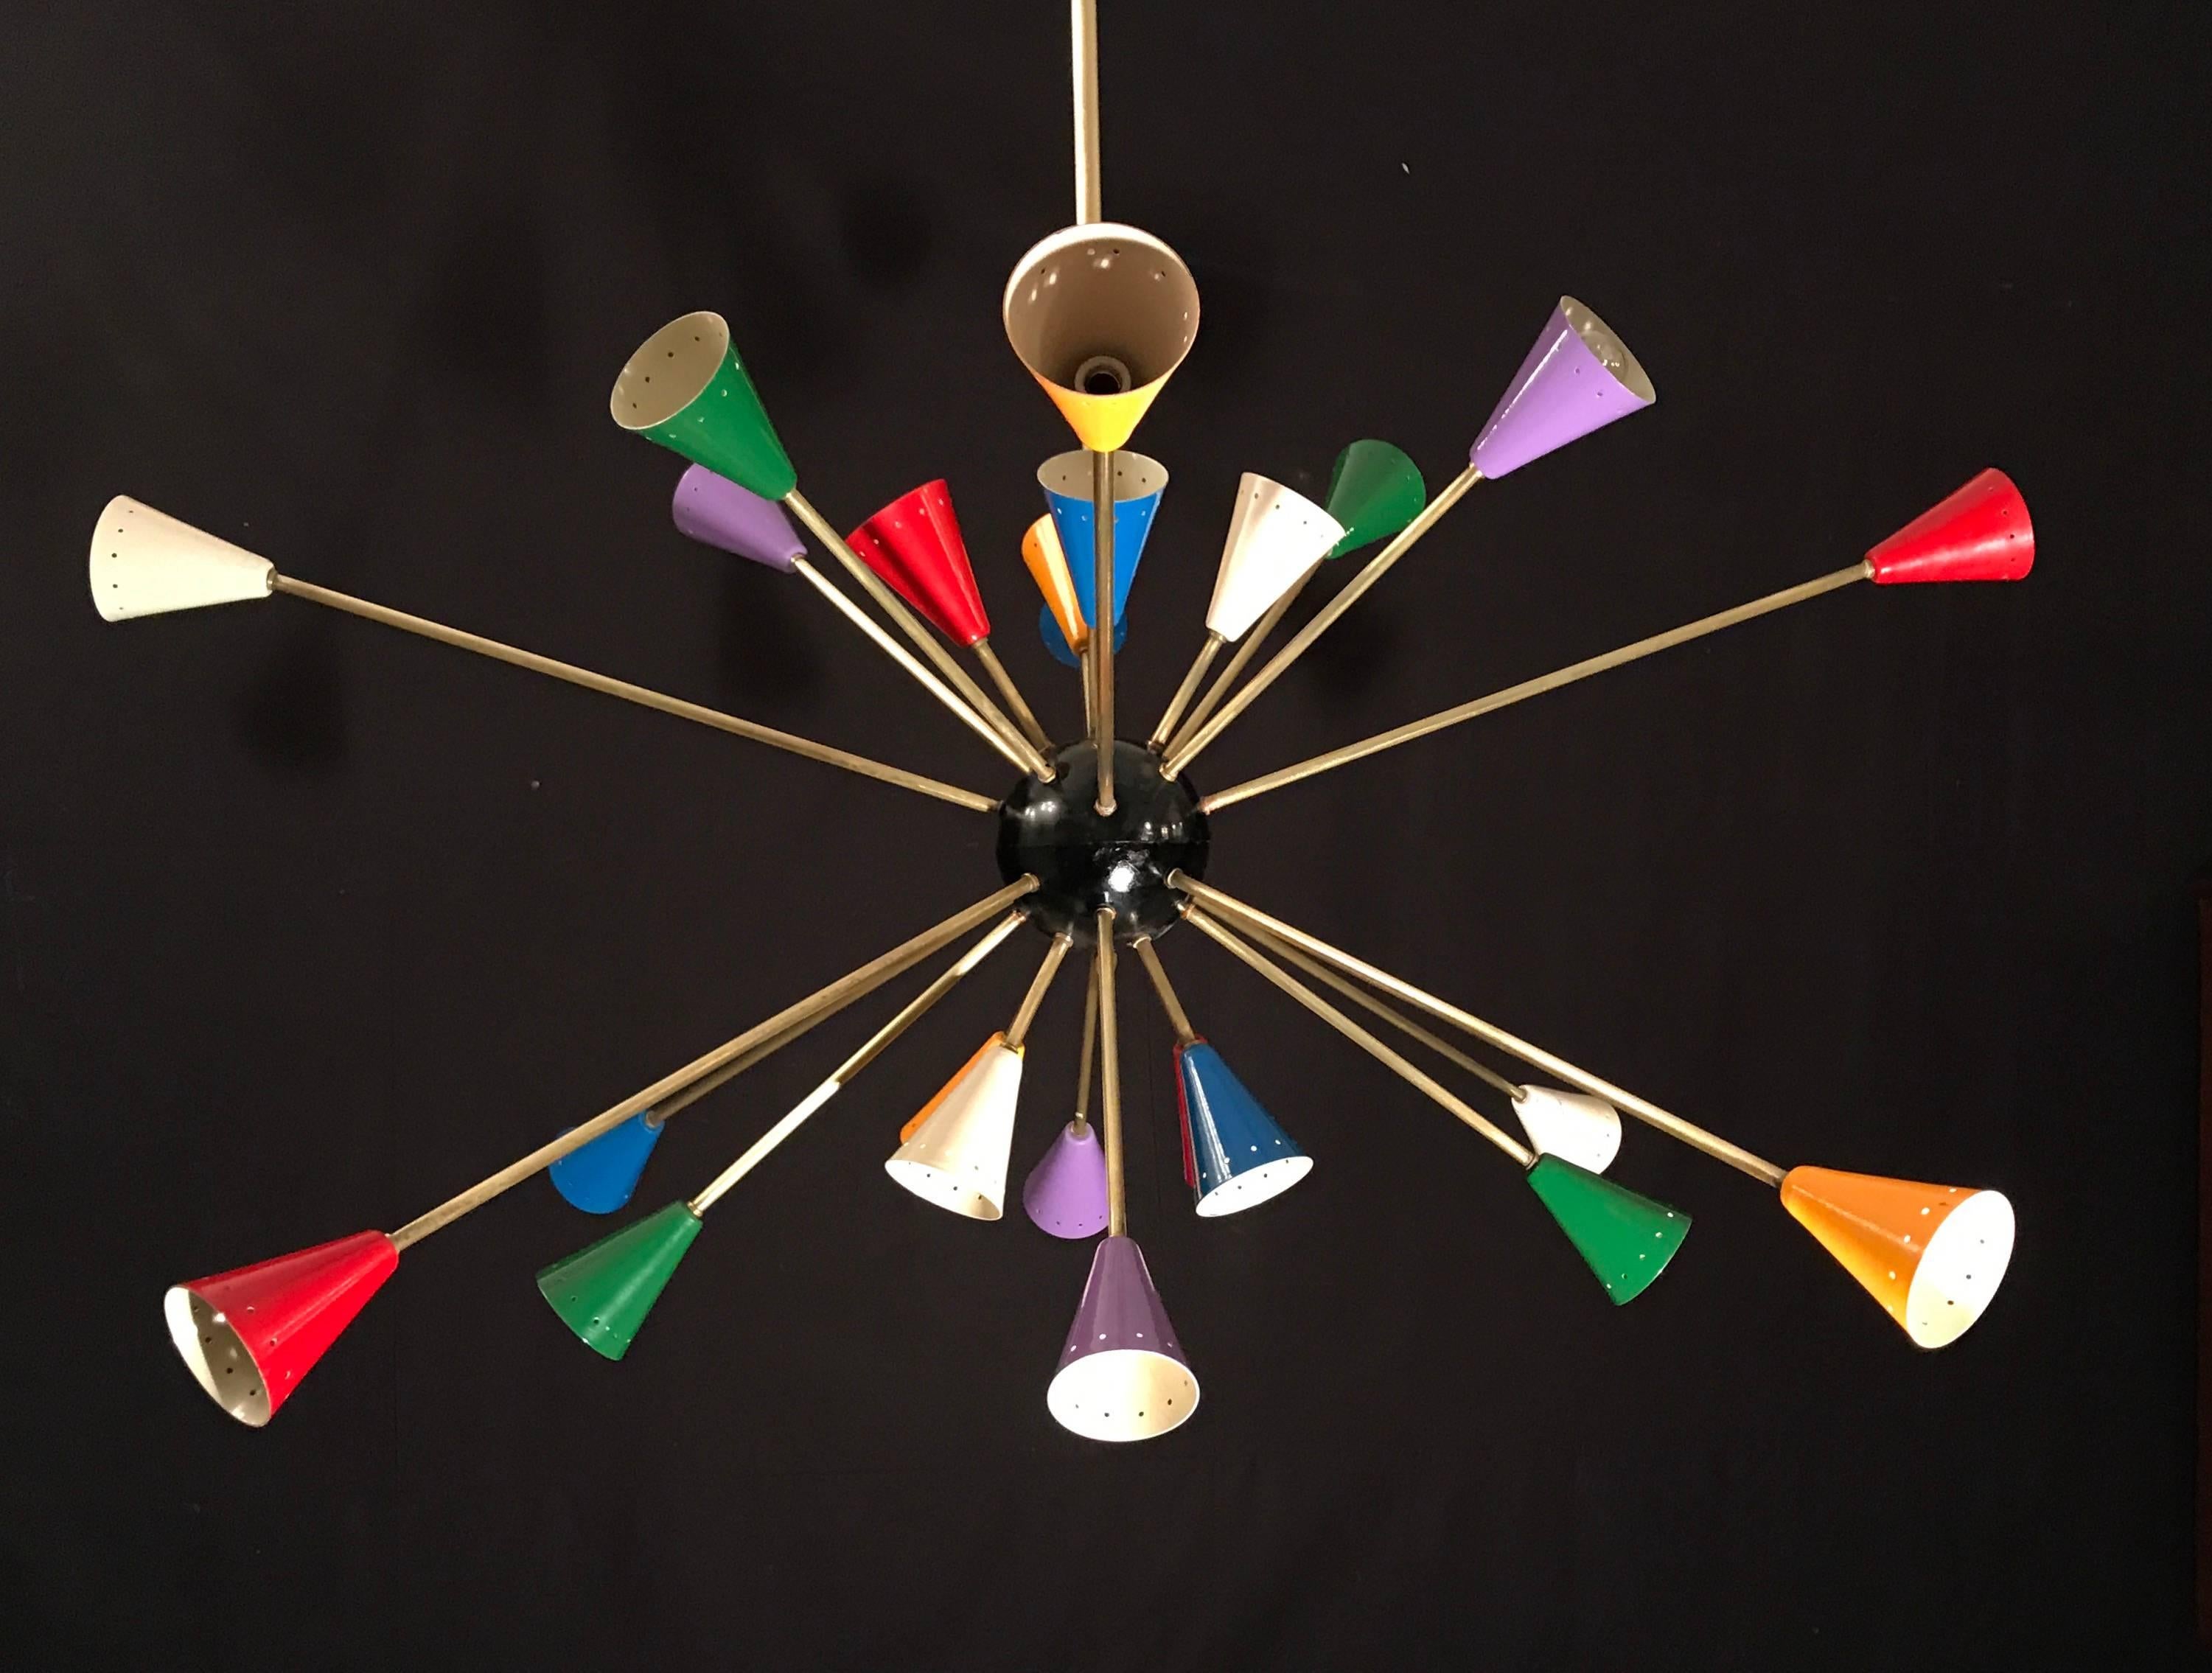 Features 24 brass arms, each sporting multicolored, perforated shades. Black central sphere.
Bearing a circa 1970s label in the canopy.
Commonly called 'Sputnik' chandeliers today (in honor of the Russian satellite that inspired a war and a design